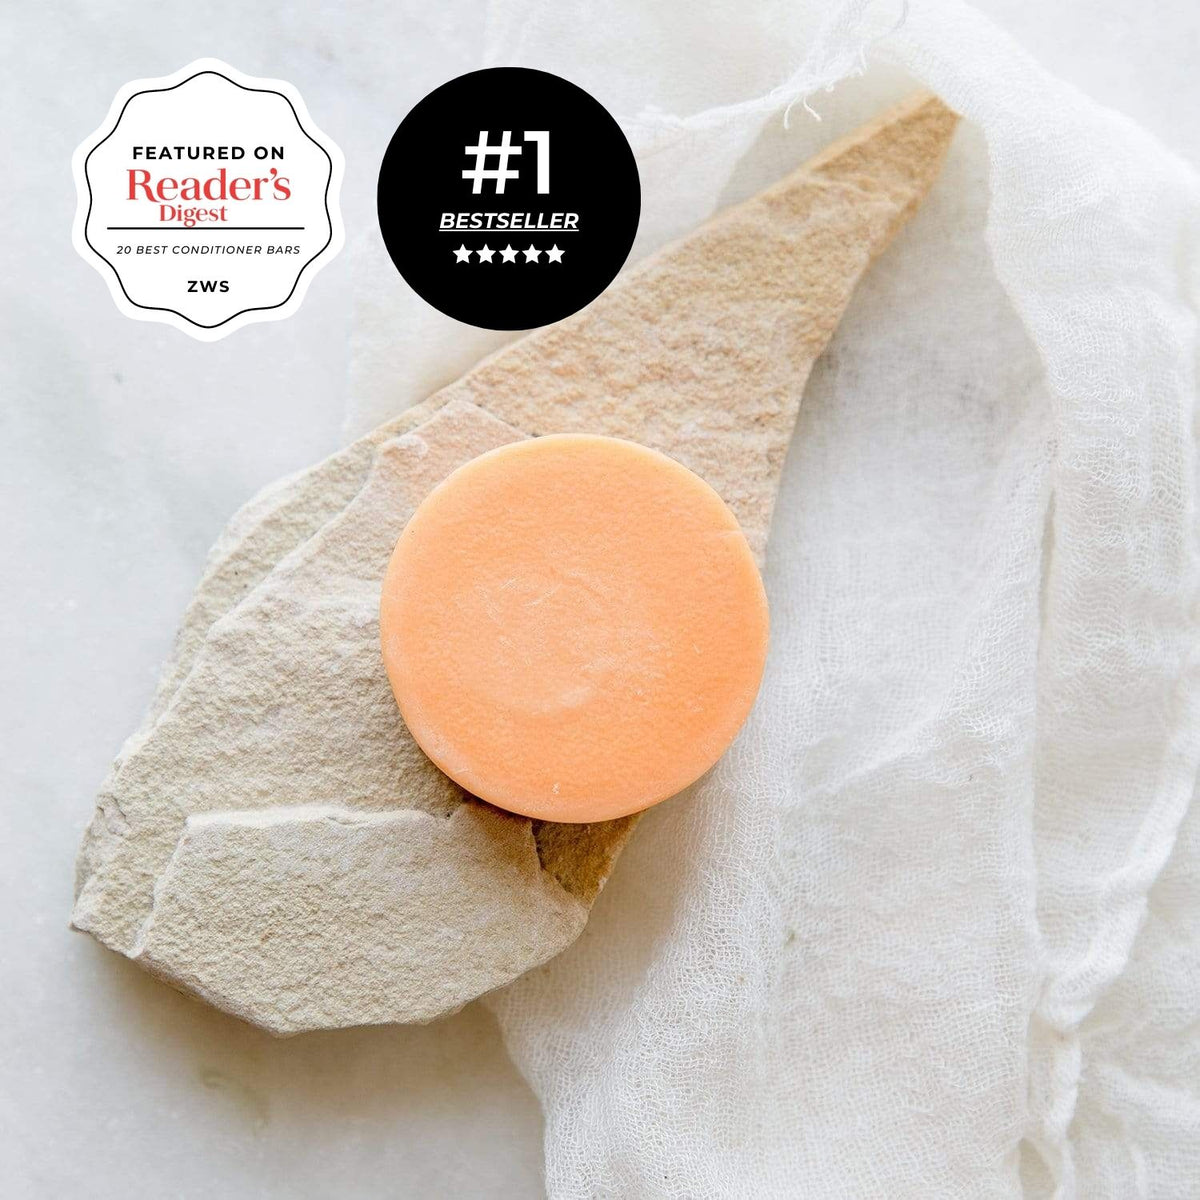 Orange Sunshine conditioner bar. Image labels read from left to right: Featured on Reader's Diget & #1 Bestseller 5 stars.